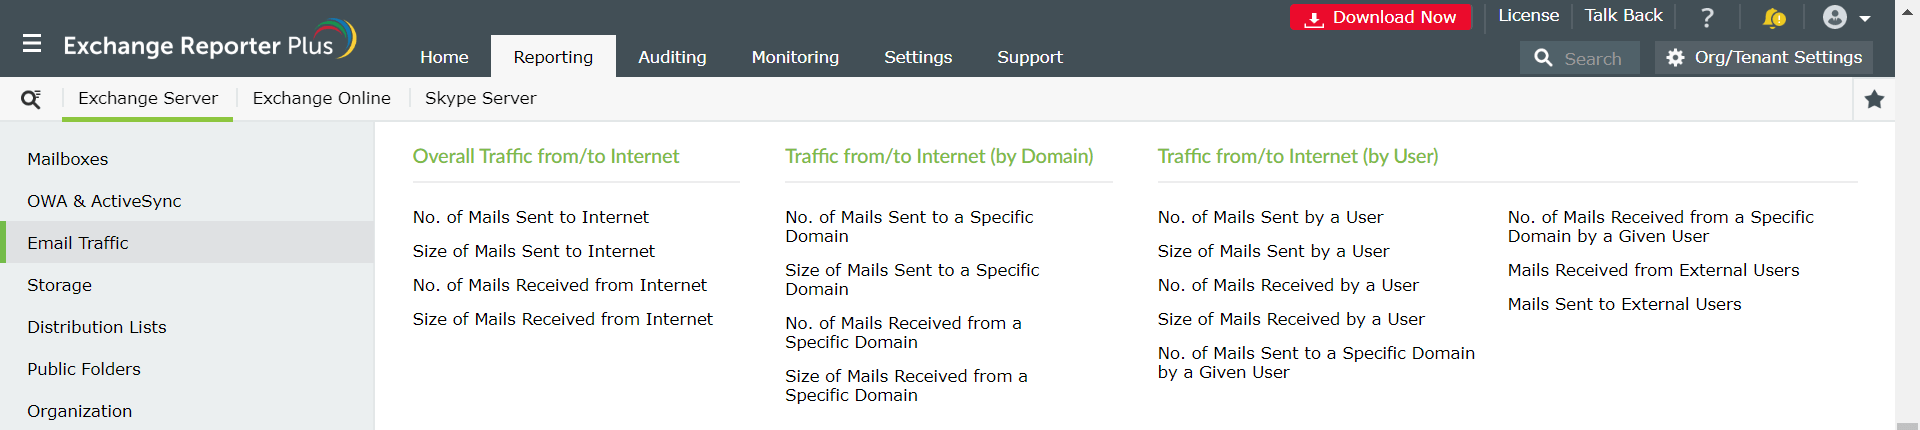 exchange-overall-internet-traffic-reports